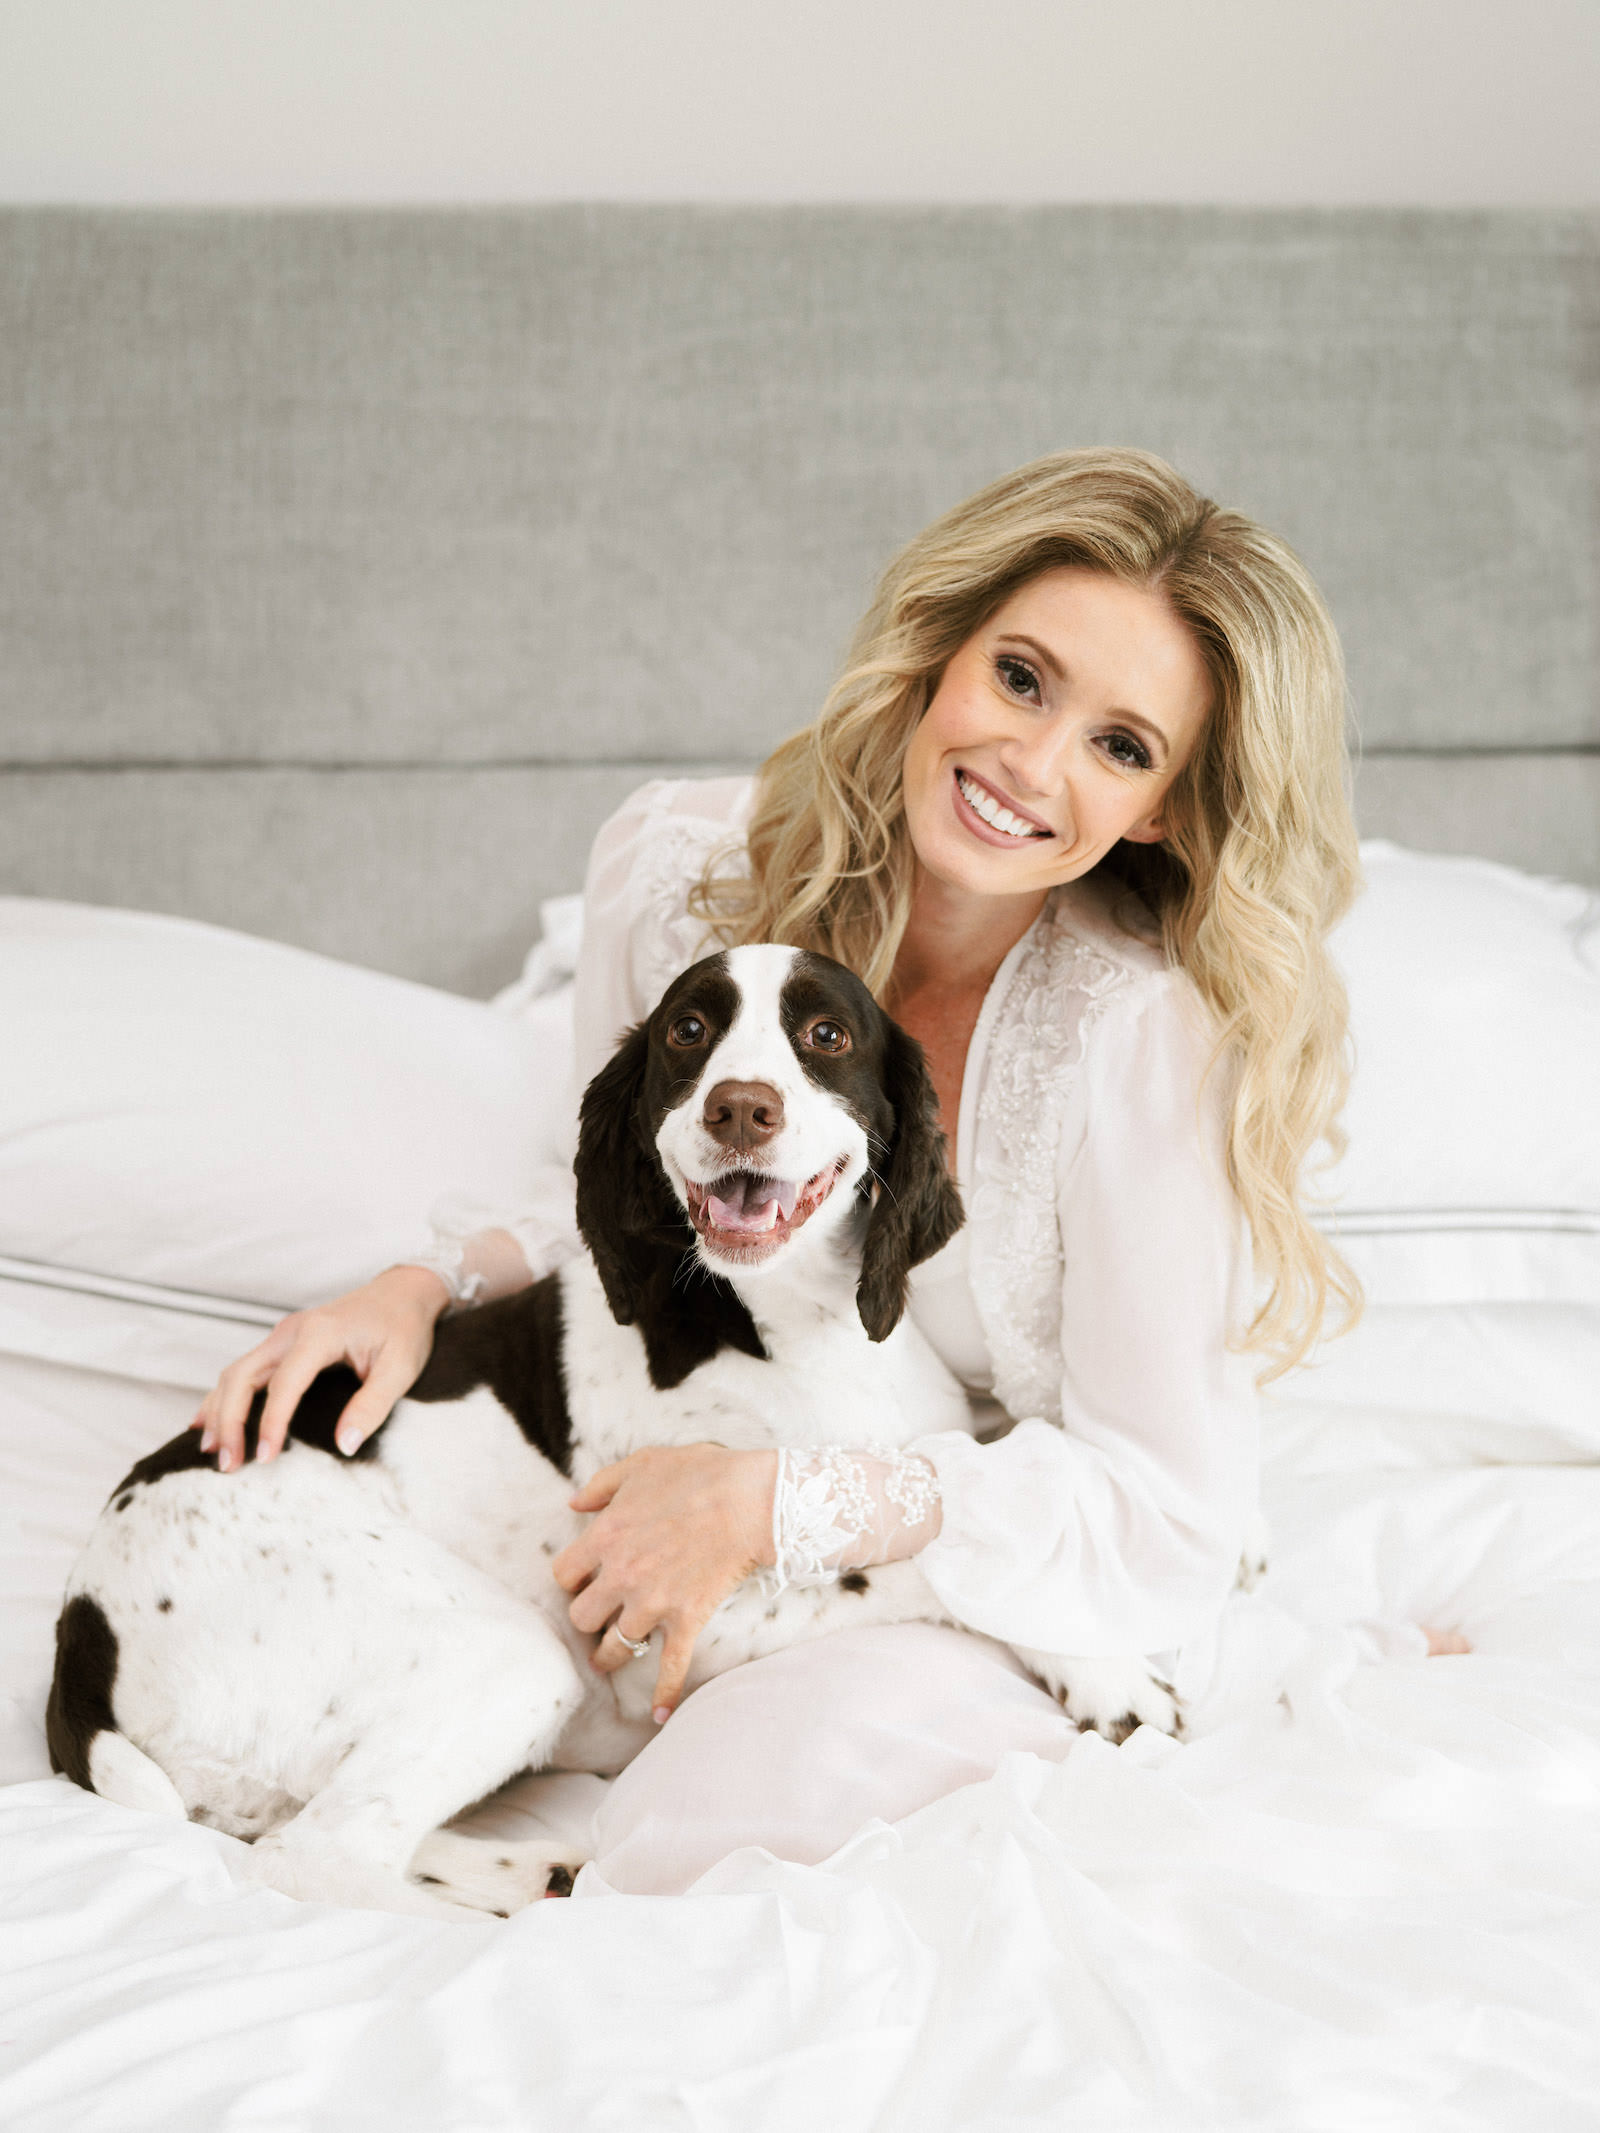 Luxurious Formal Wedding, Bride Getting Wedding Ready with Dog on Bed | Tampa Bay Pet Planner FairyTail Pet Care